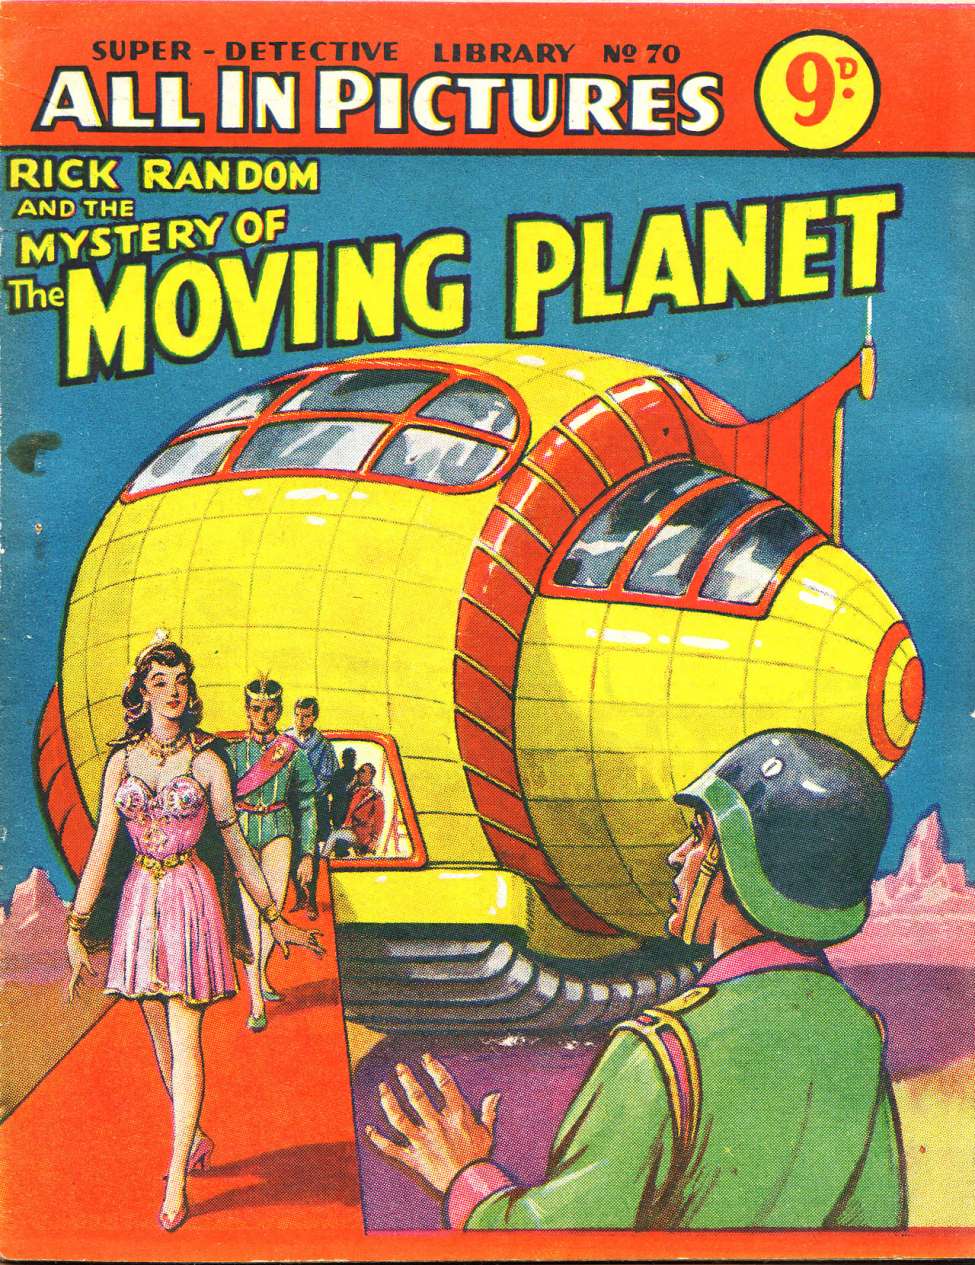 Book Cover For Super Detective Library 70 - The Mystery of the Moving Planet